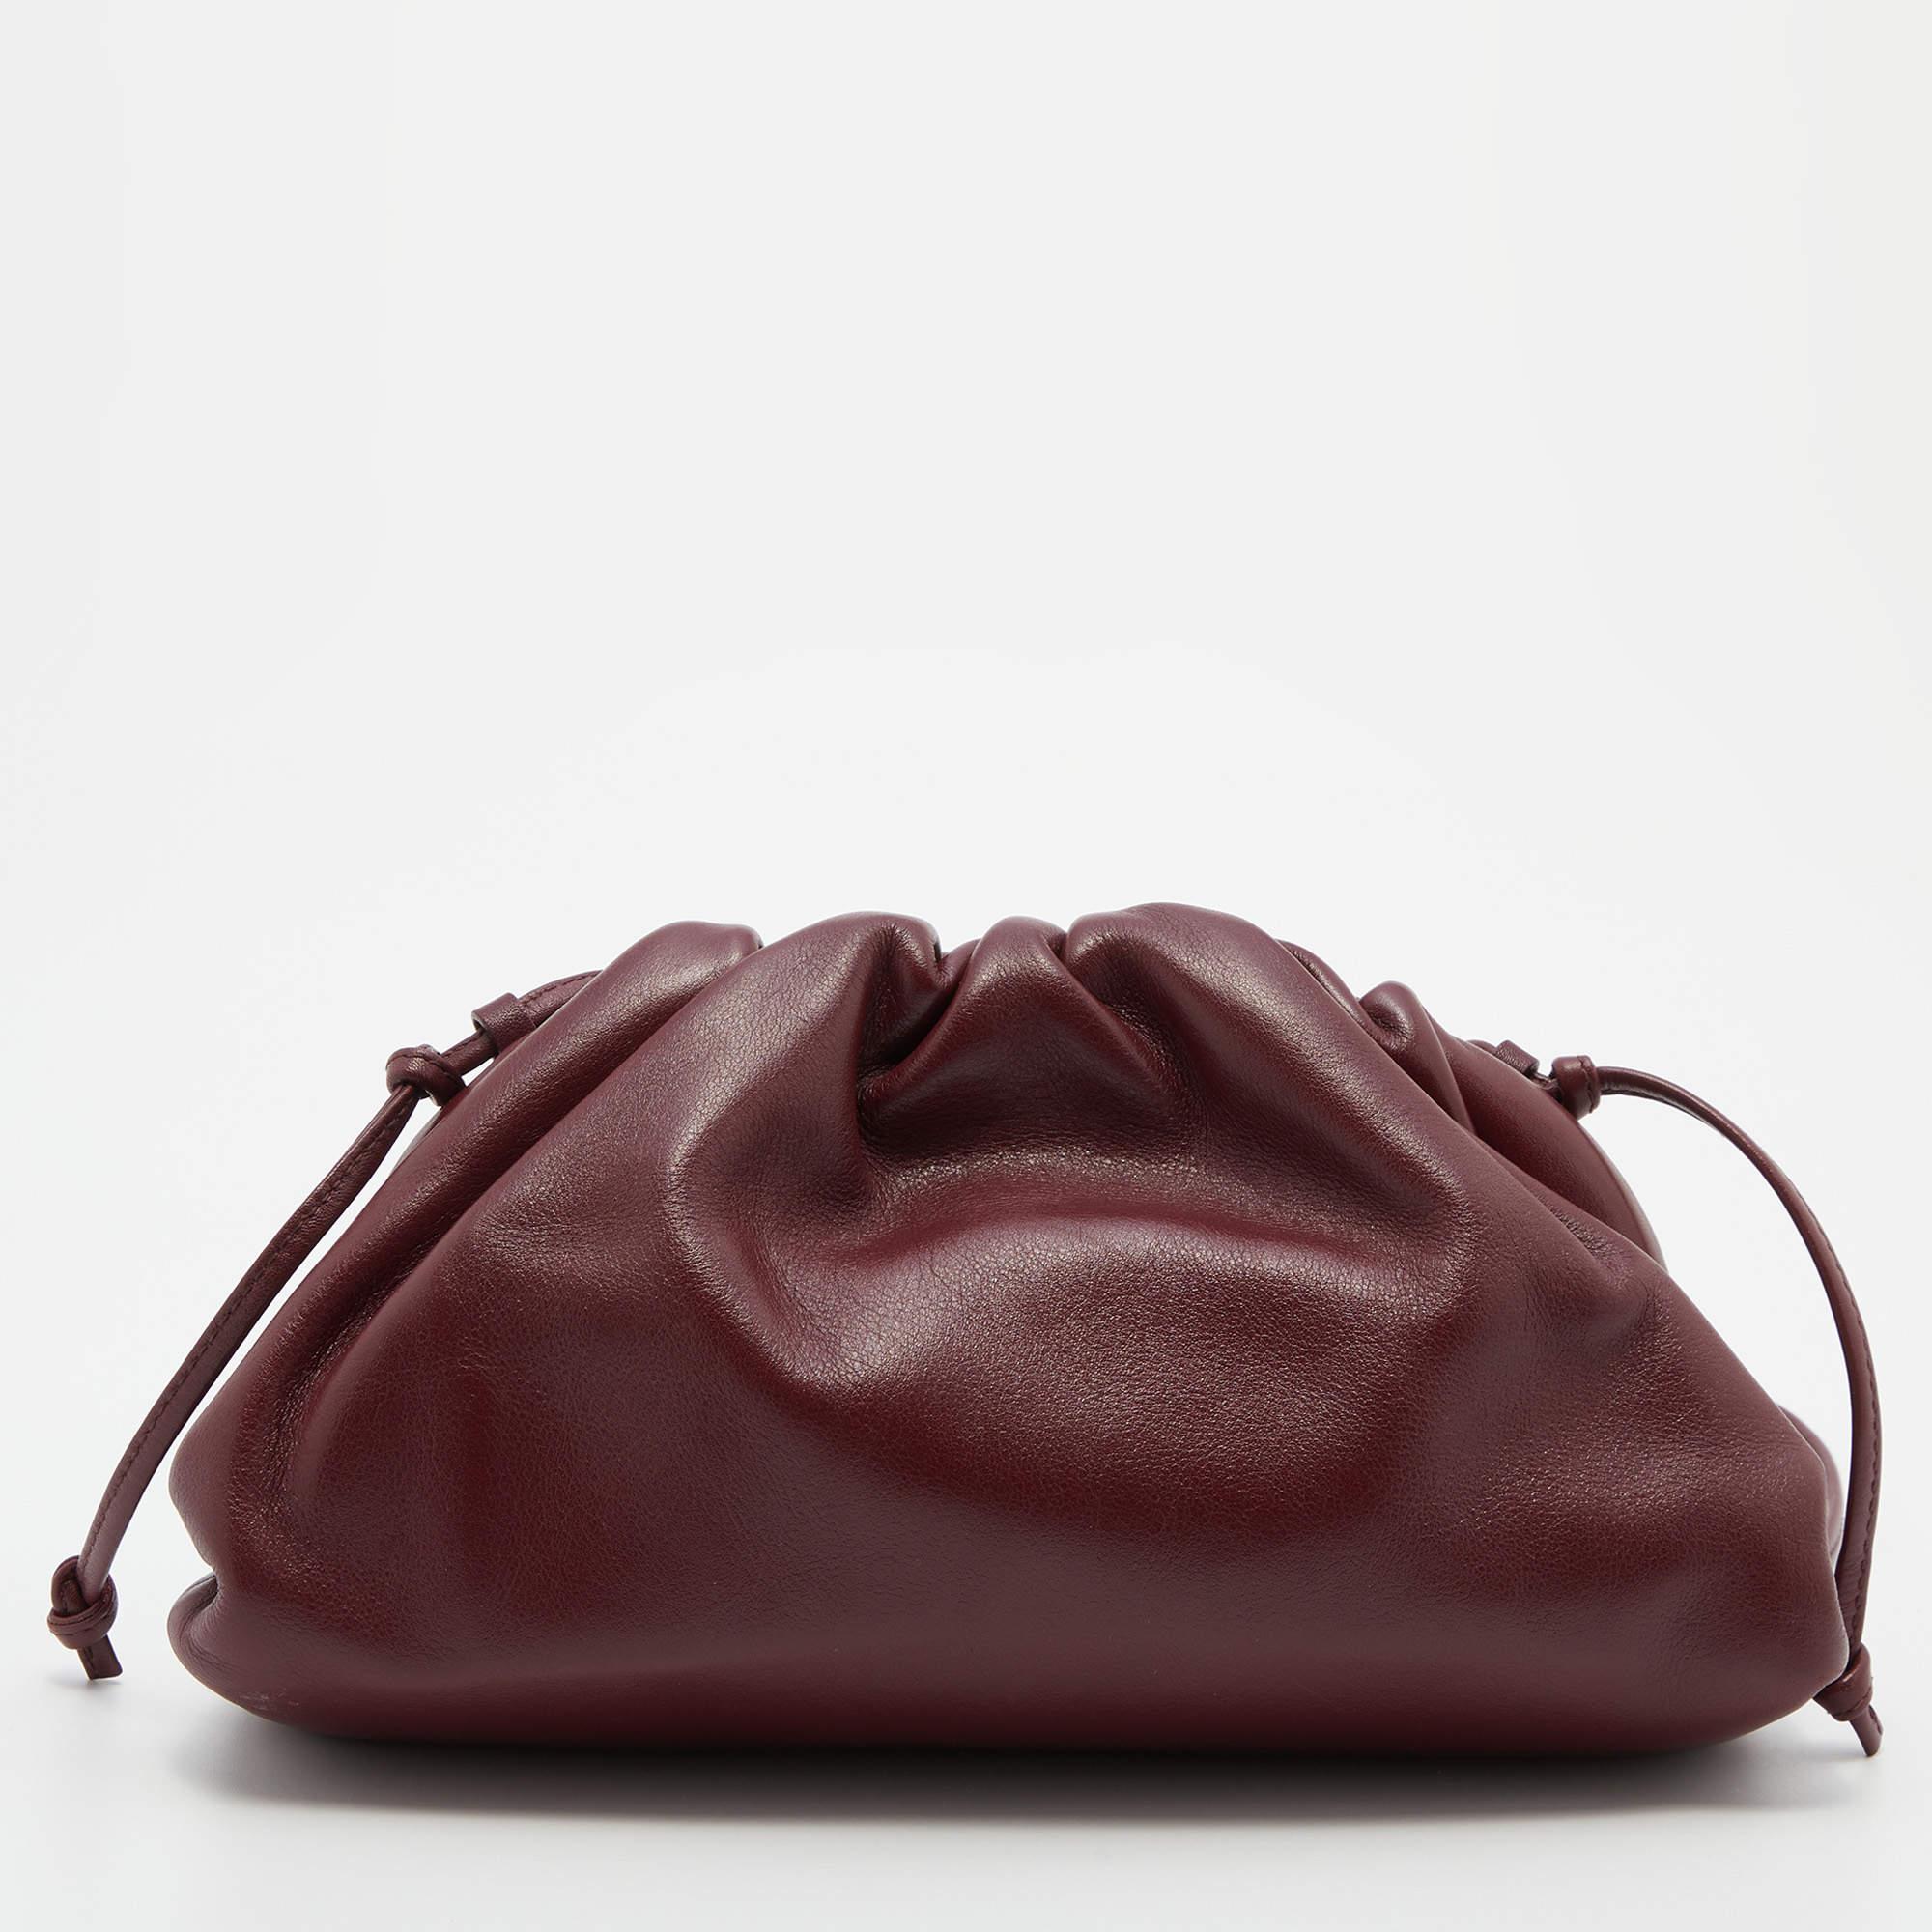 In line with Bottega Veneta's DNA, Daniel Lee vouched for clean lines and a timeless appeal during his stint as Creative Director. This mini The Pouch bag is made from burgundy leather and gathered along the top. It can be held in your hand, tucked